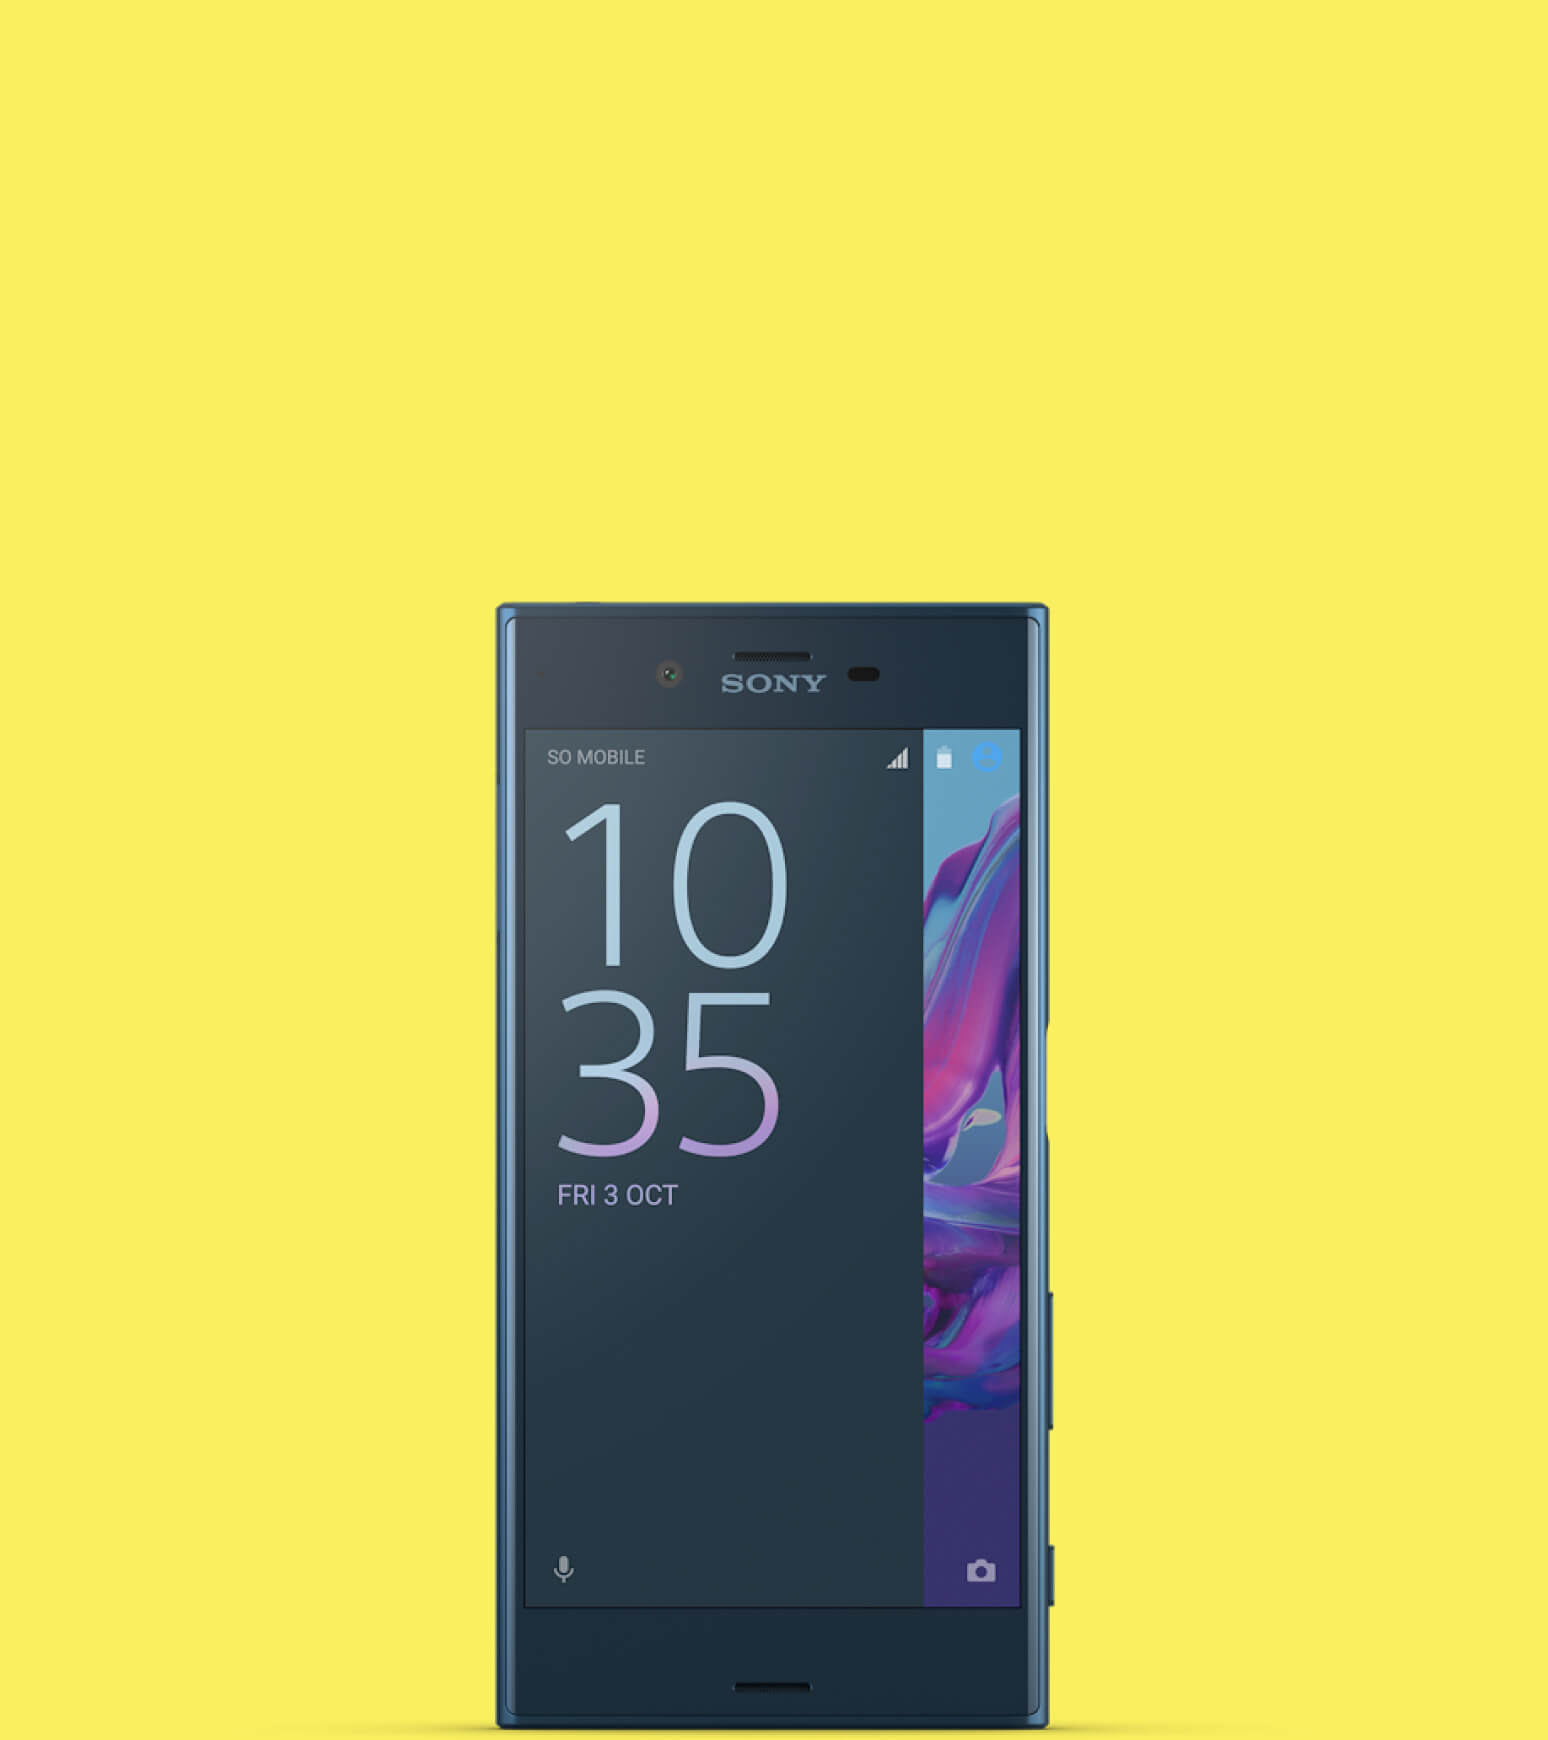 Sony Xperia is One of The Poplar Brands Among World